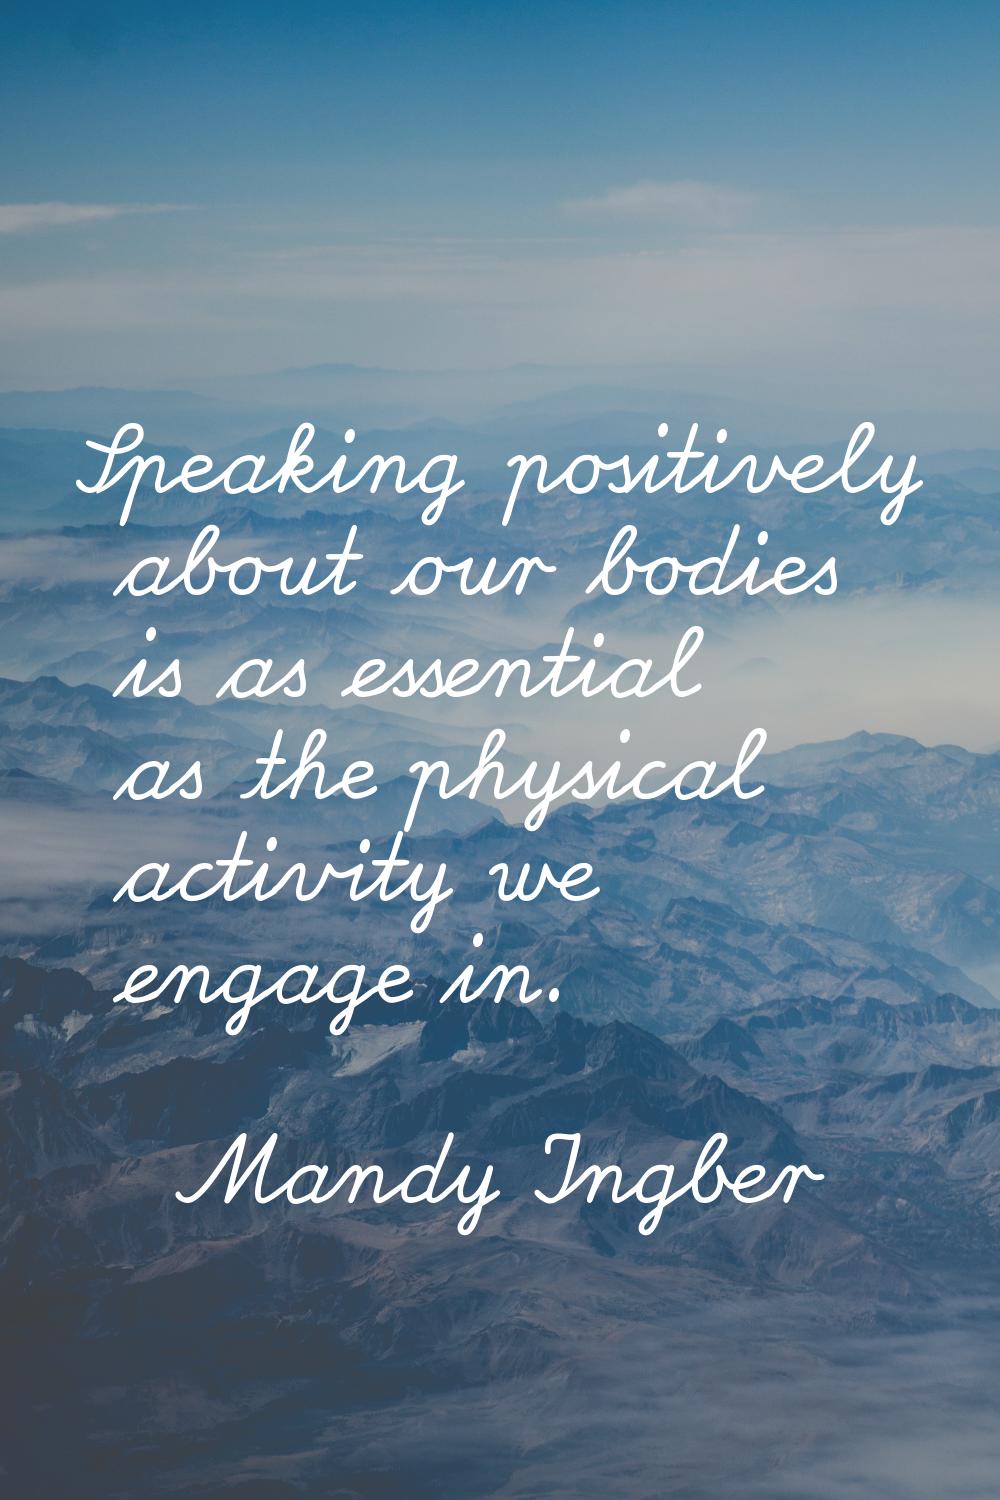 Speaking positively about our bodies is as essential as the physical activity we engage in.